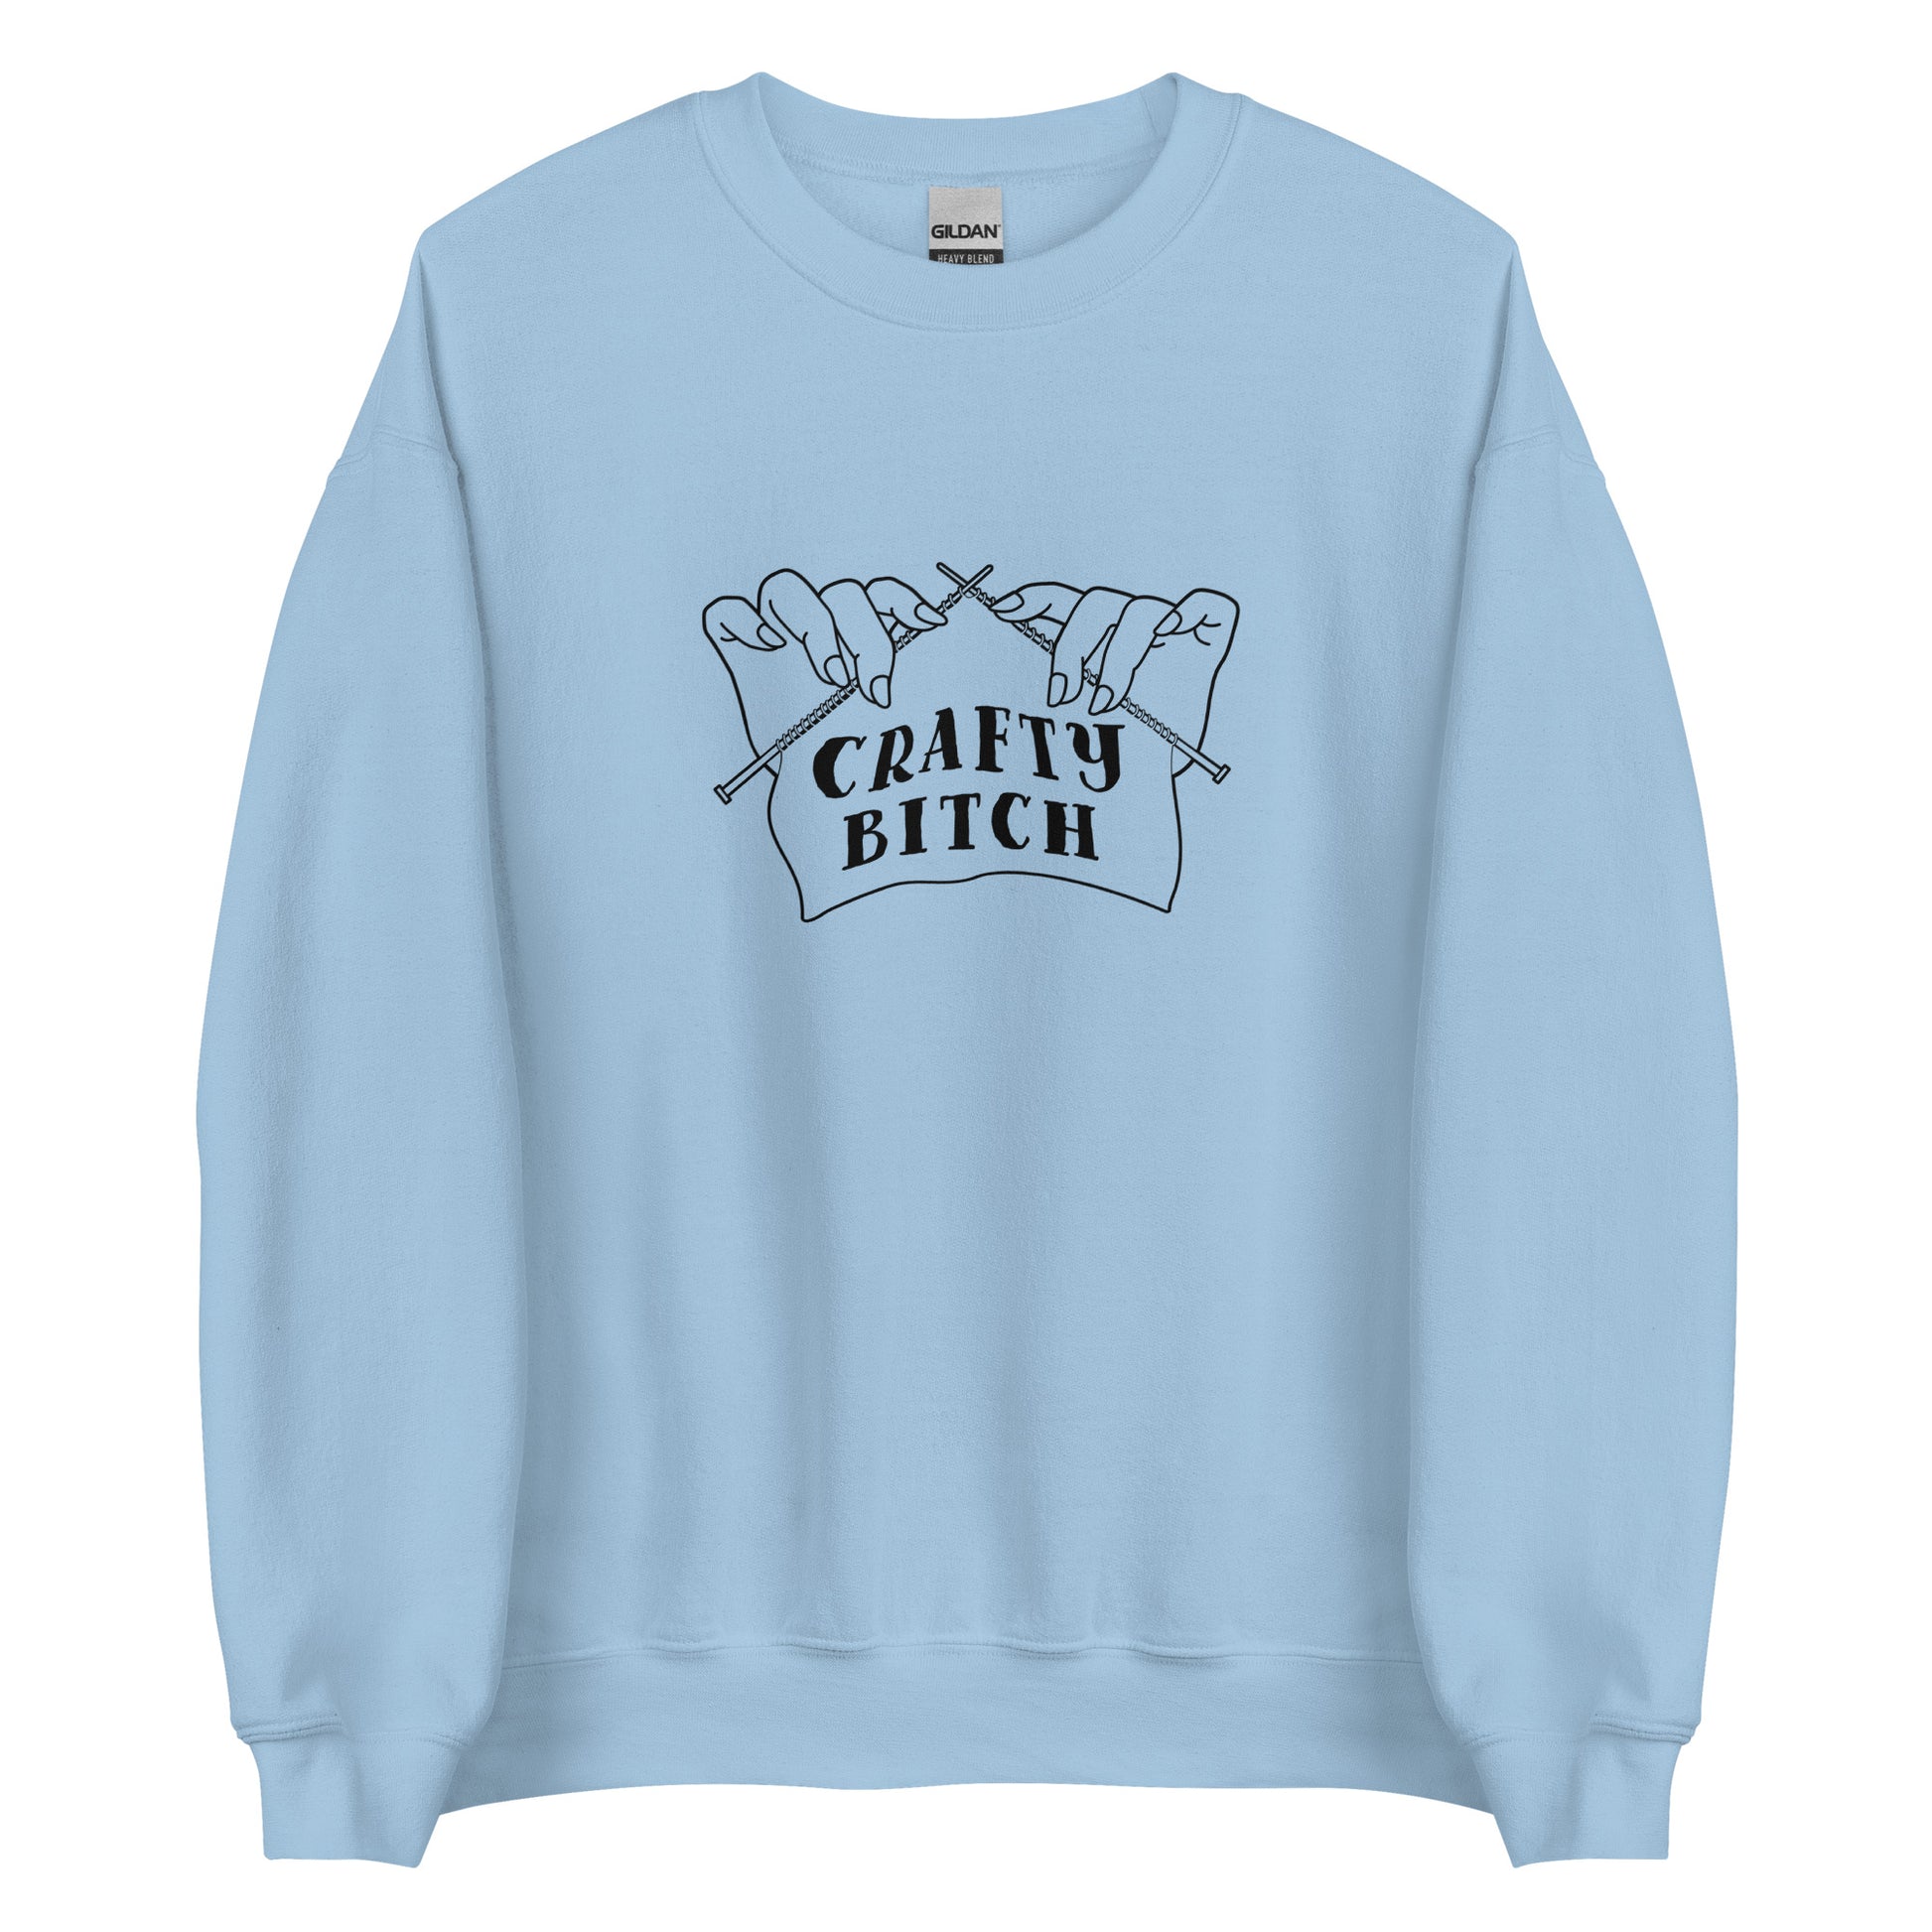 A light blue crewneck sweatshirt featuring a single-color illustration of a pair of hands holding knitting needles. Fabric on the needles features text that reads "crafty bitch".